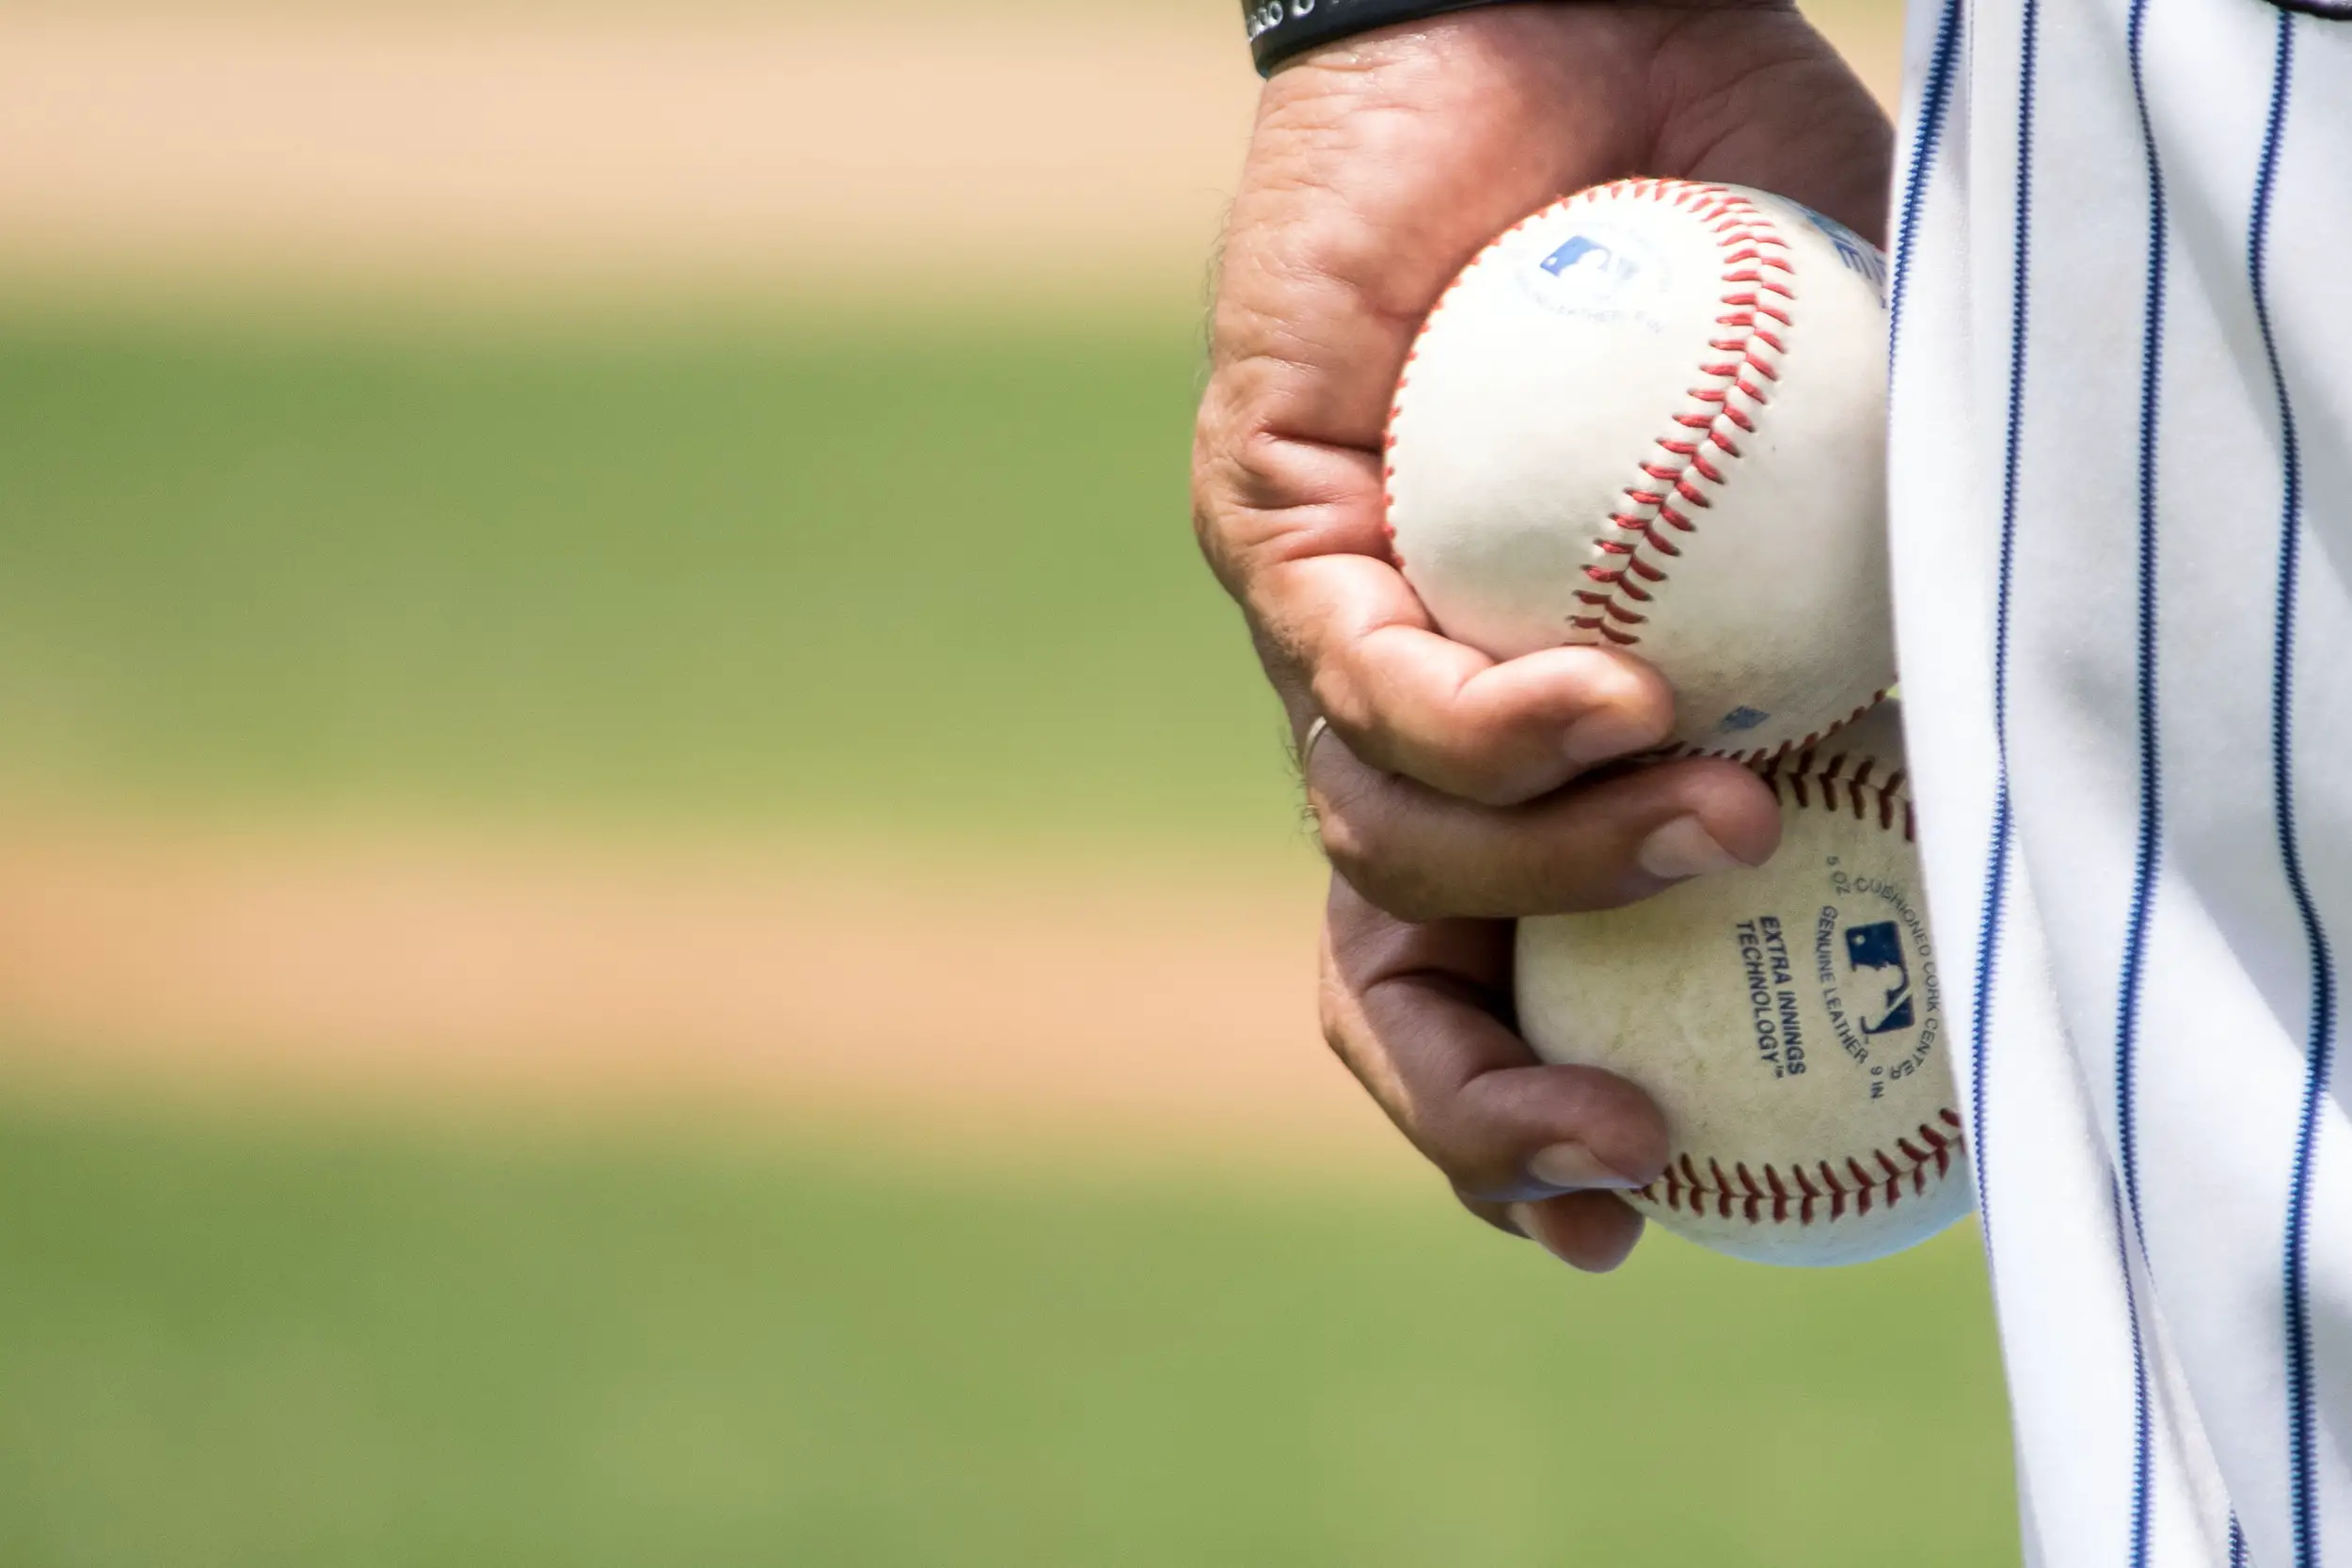 Baseball Rosin Bags What Are They And How Do They Help?